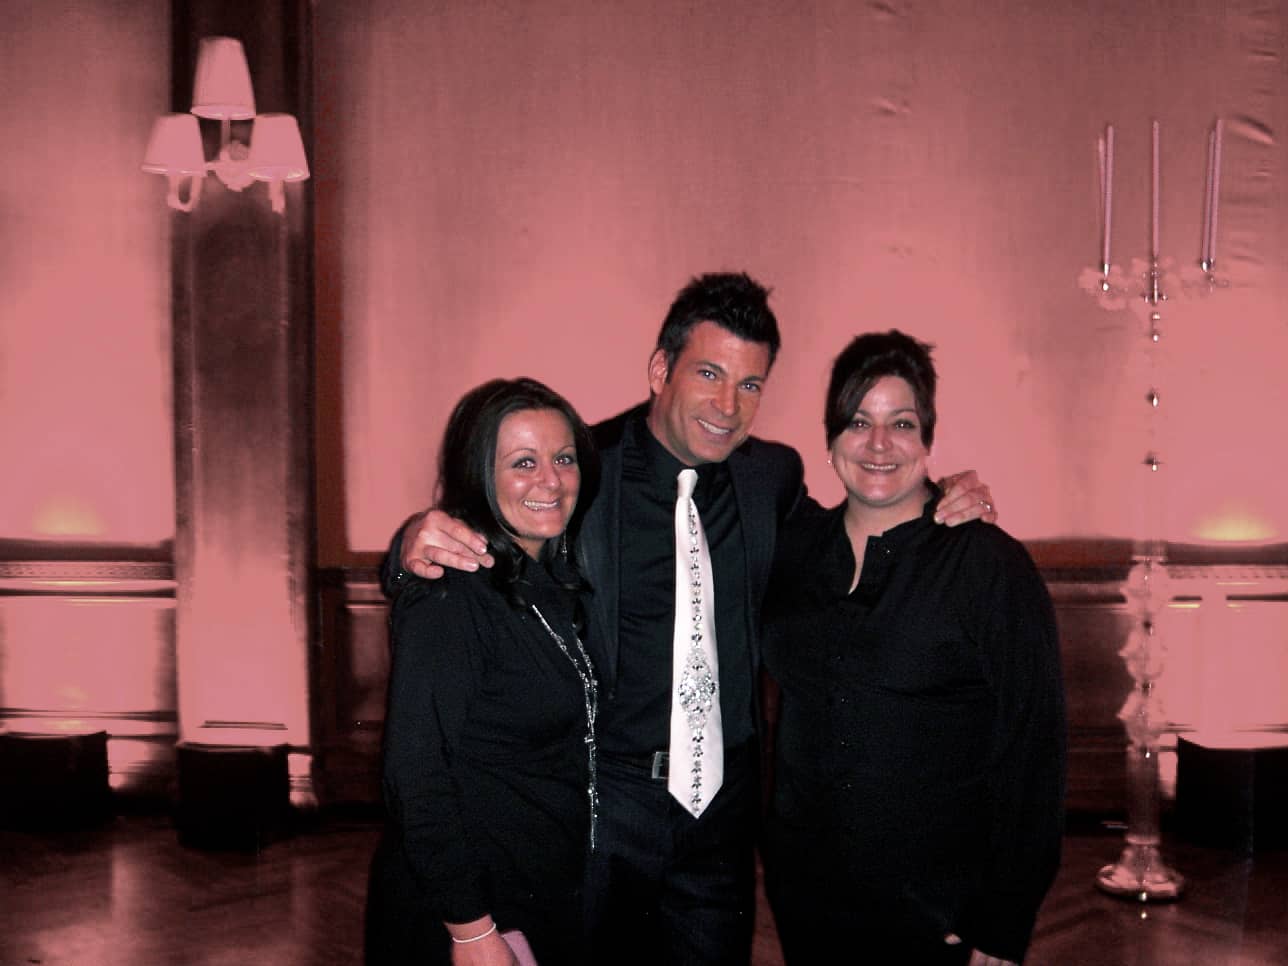 Melissa Mazzei & the staff of chez vous caterers teamed up celebrity party planner David Tutera to cater Nicole & Dwayne’s Monte Carlo inspired wedding at the Prince George Ballroom in nyc.